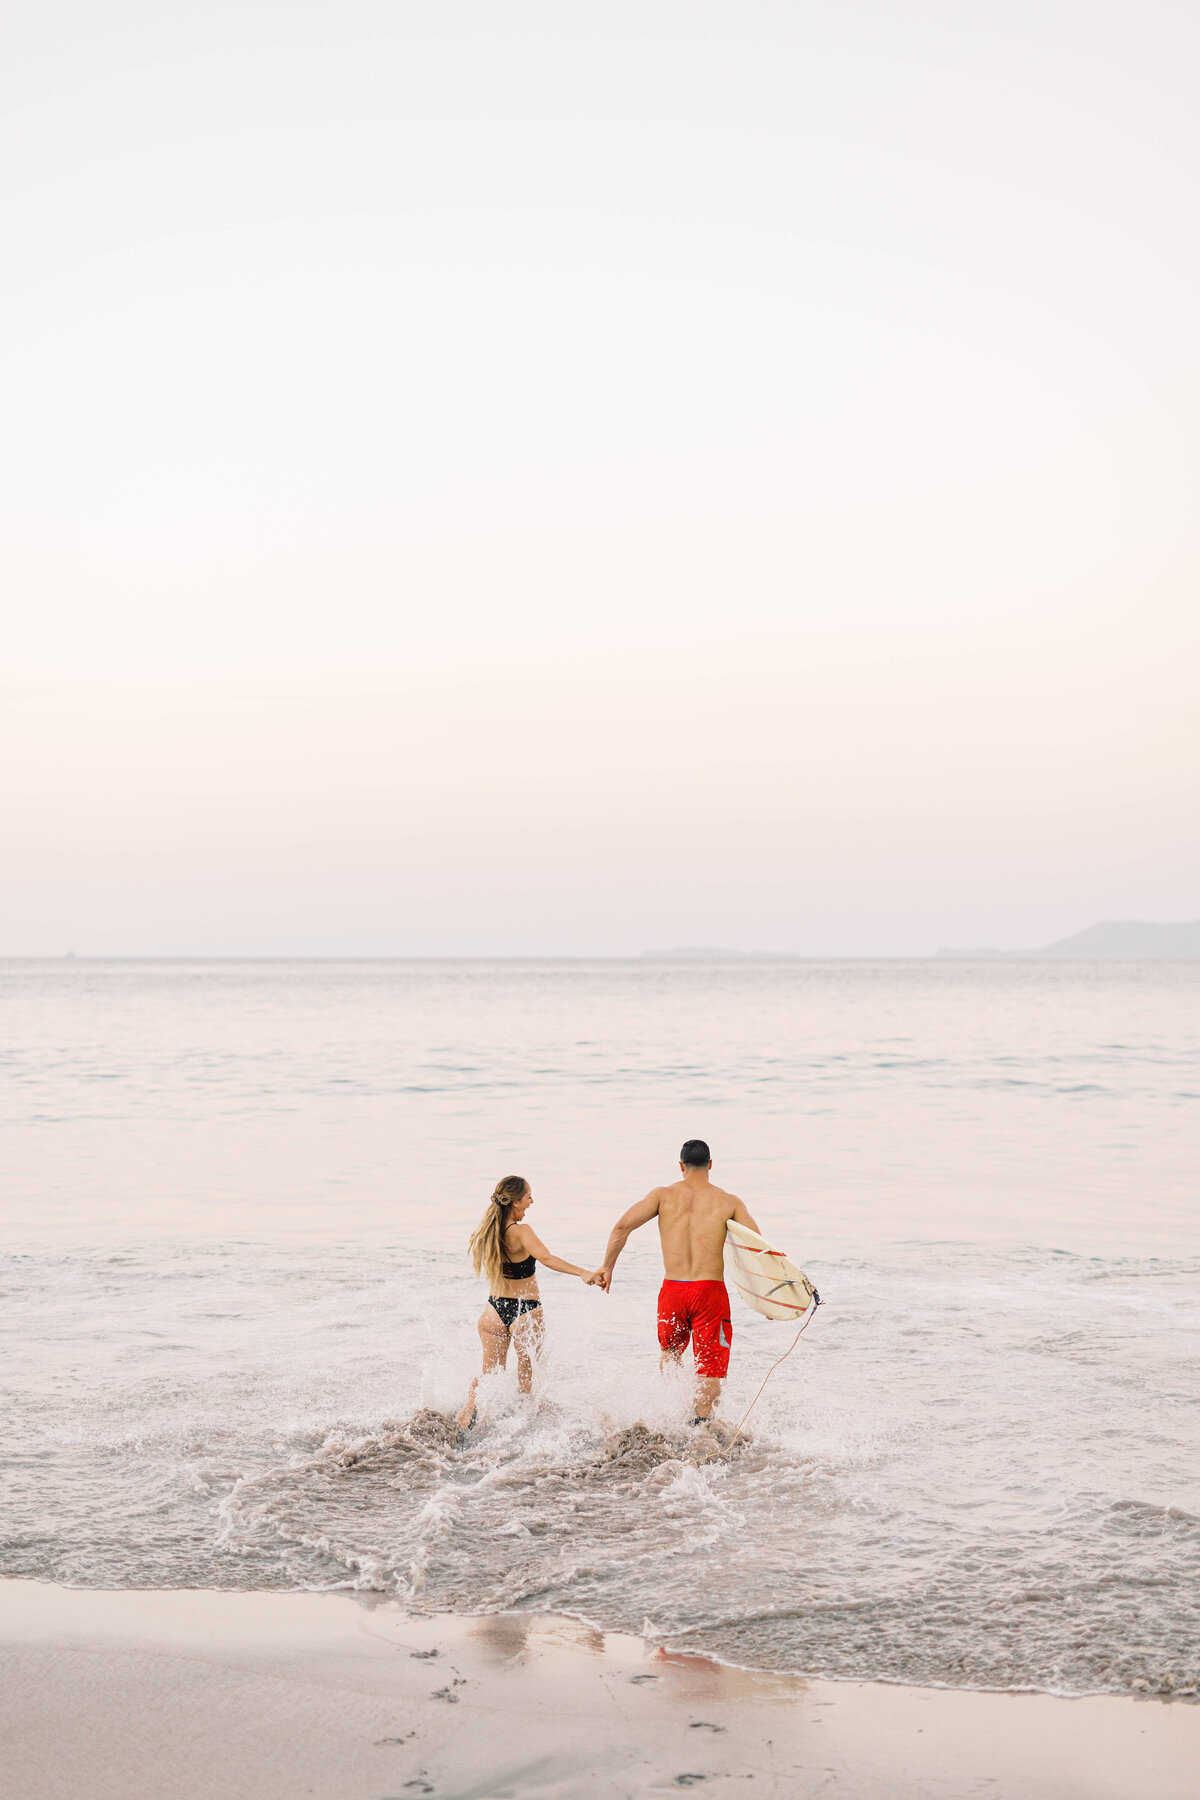 A Beach Engagement Session in Tamarindo, Costa Rica 1656